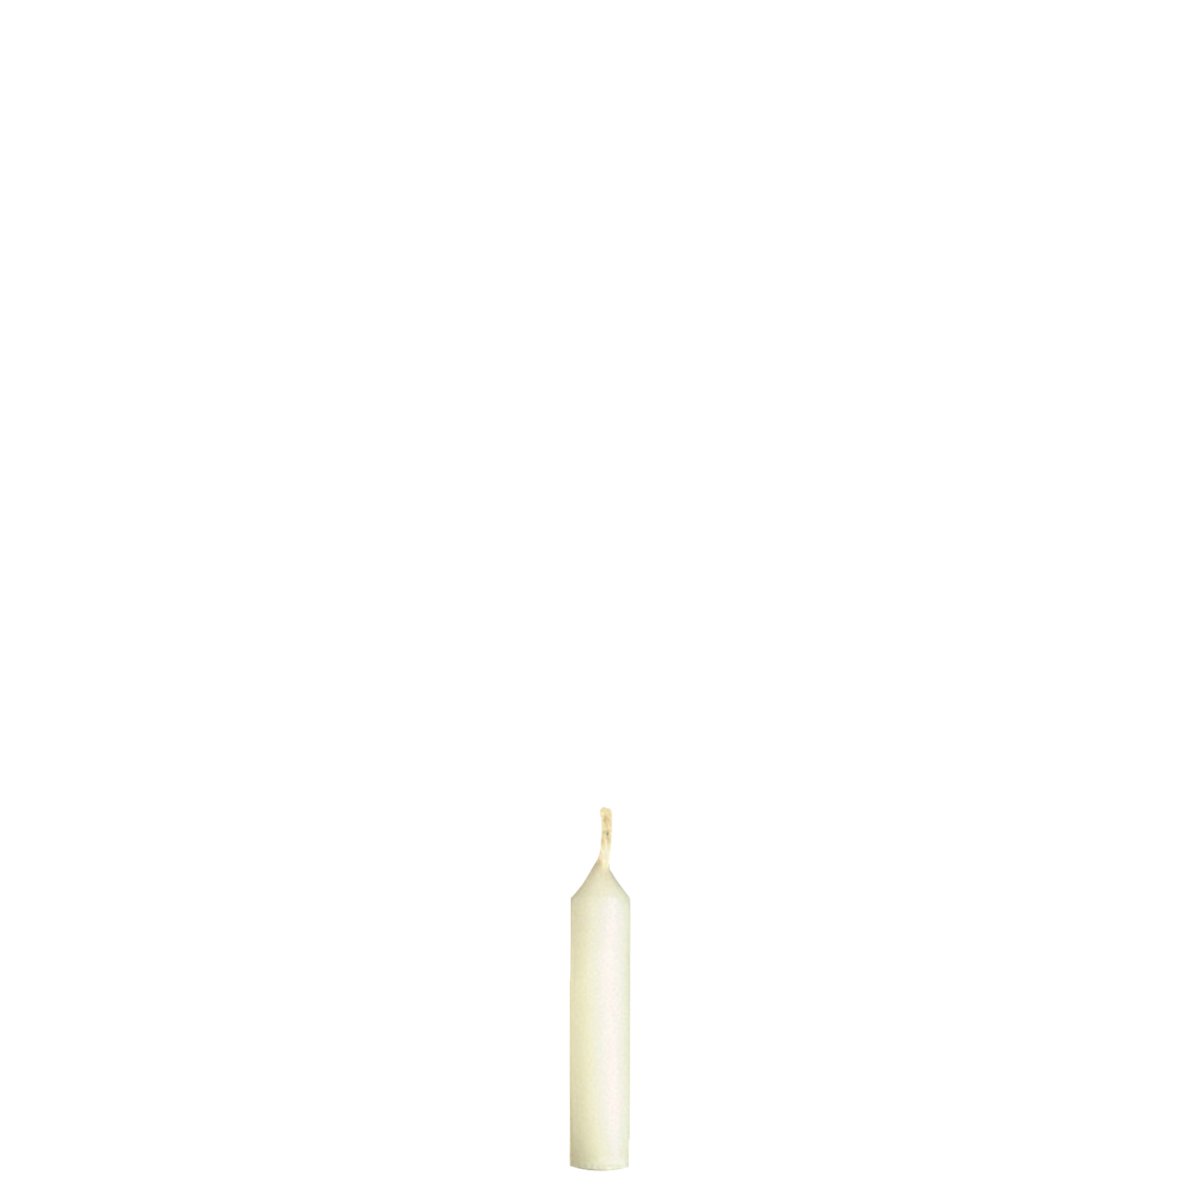 Votive Candles - Hayes & Finch